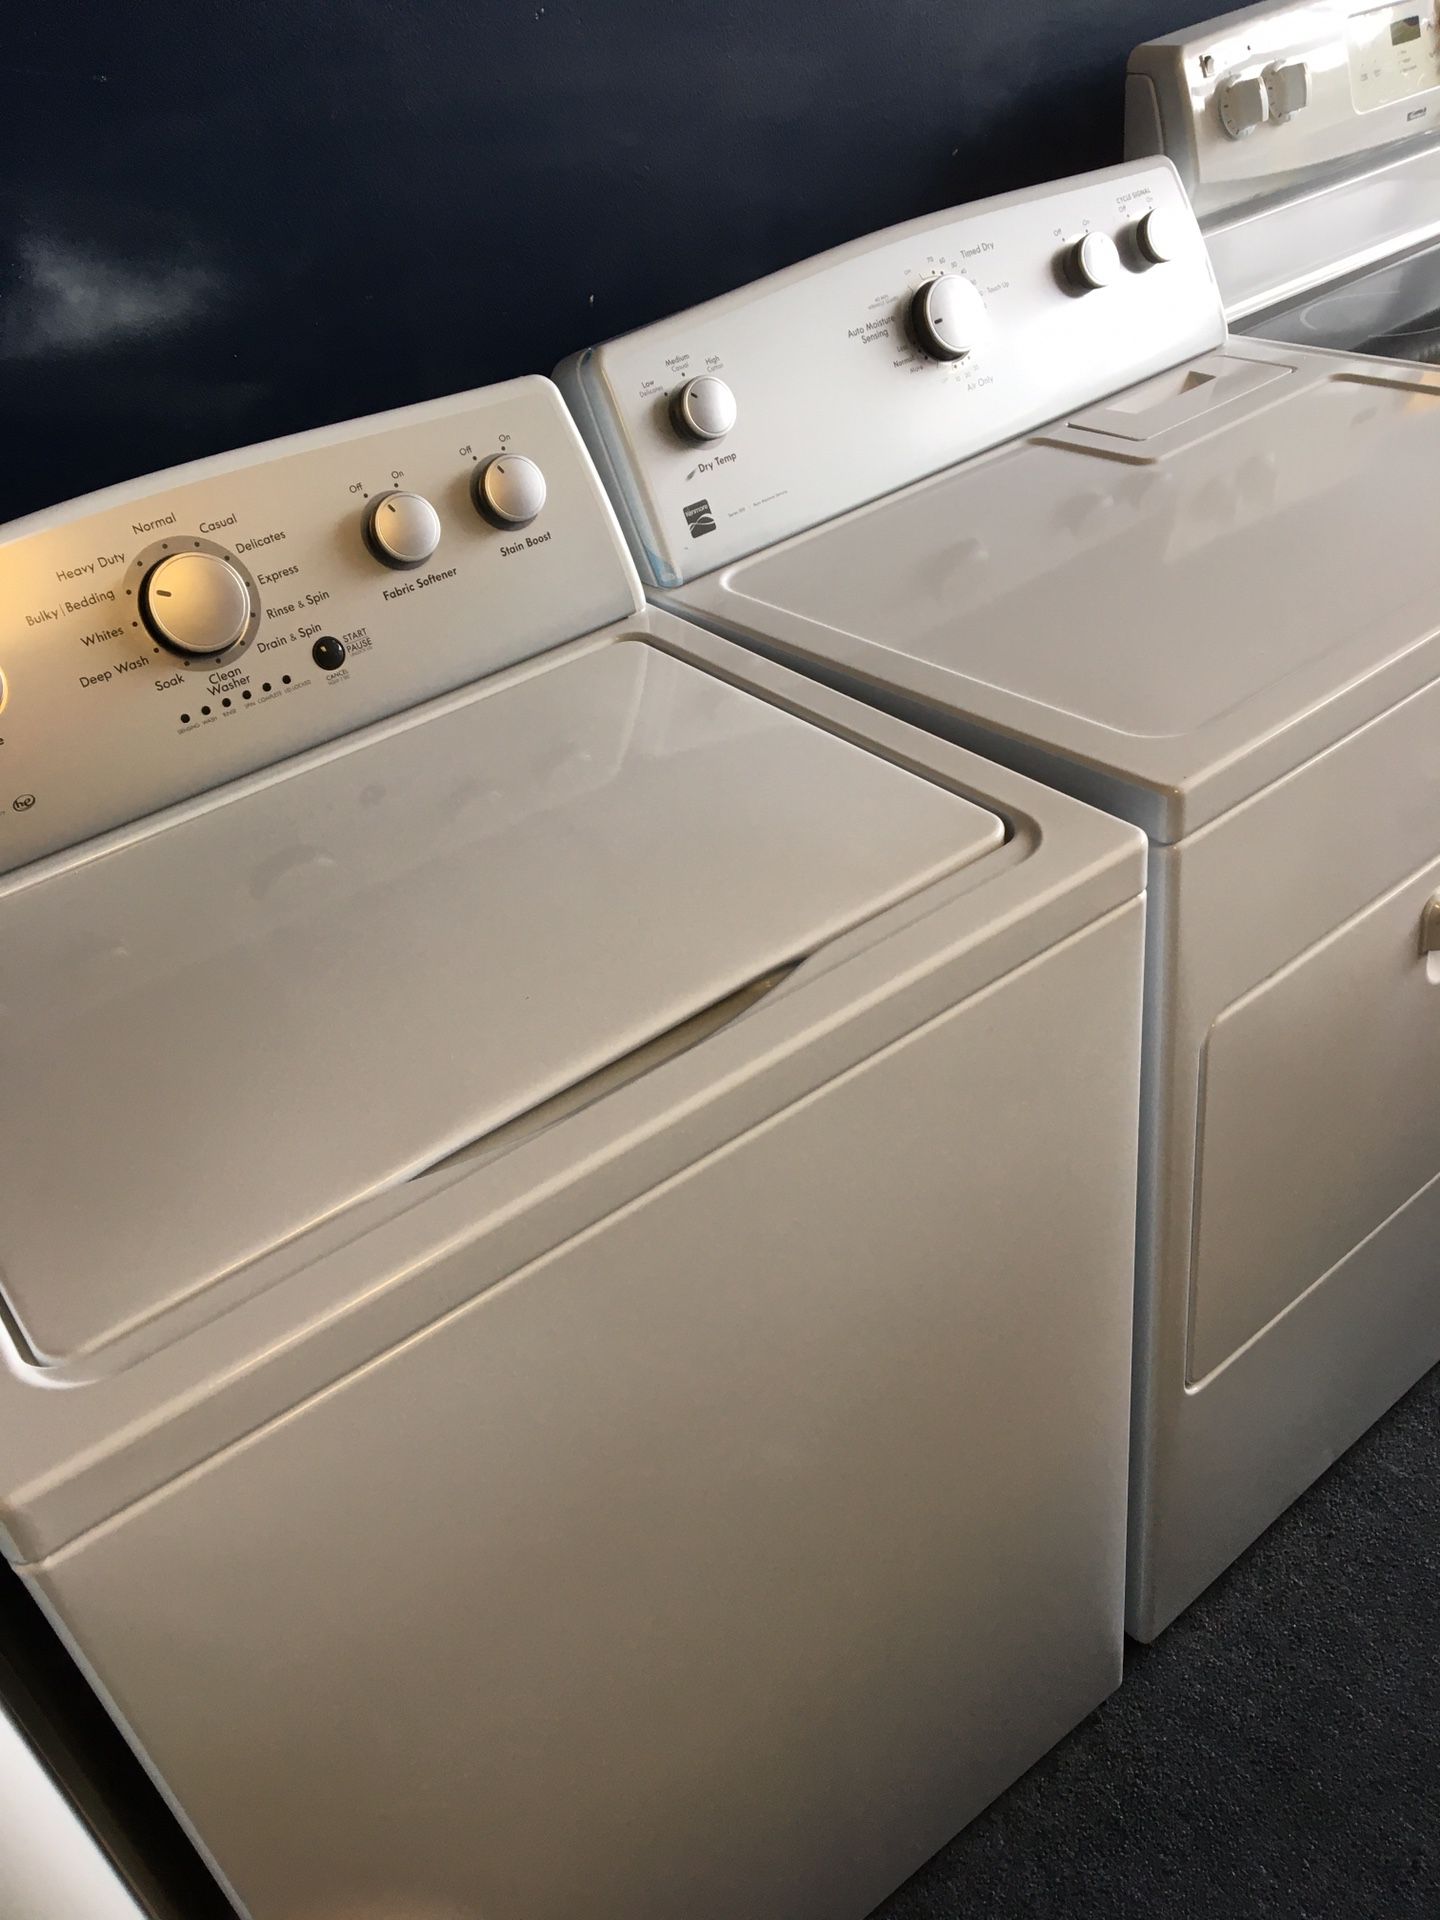 New washer And Dryer Set